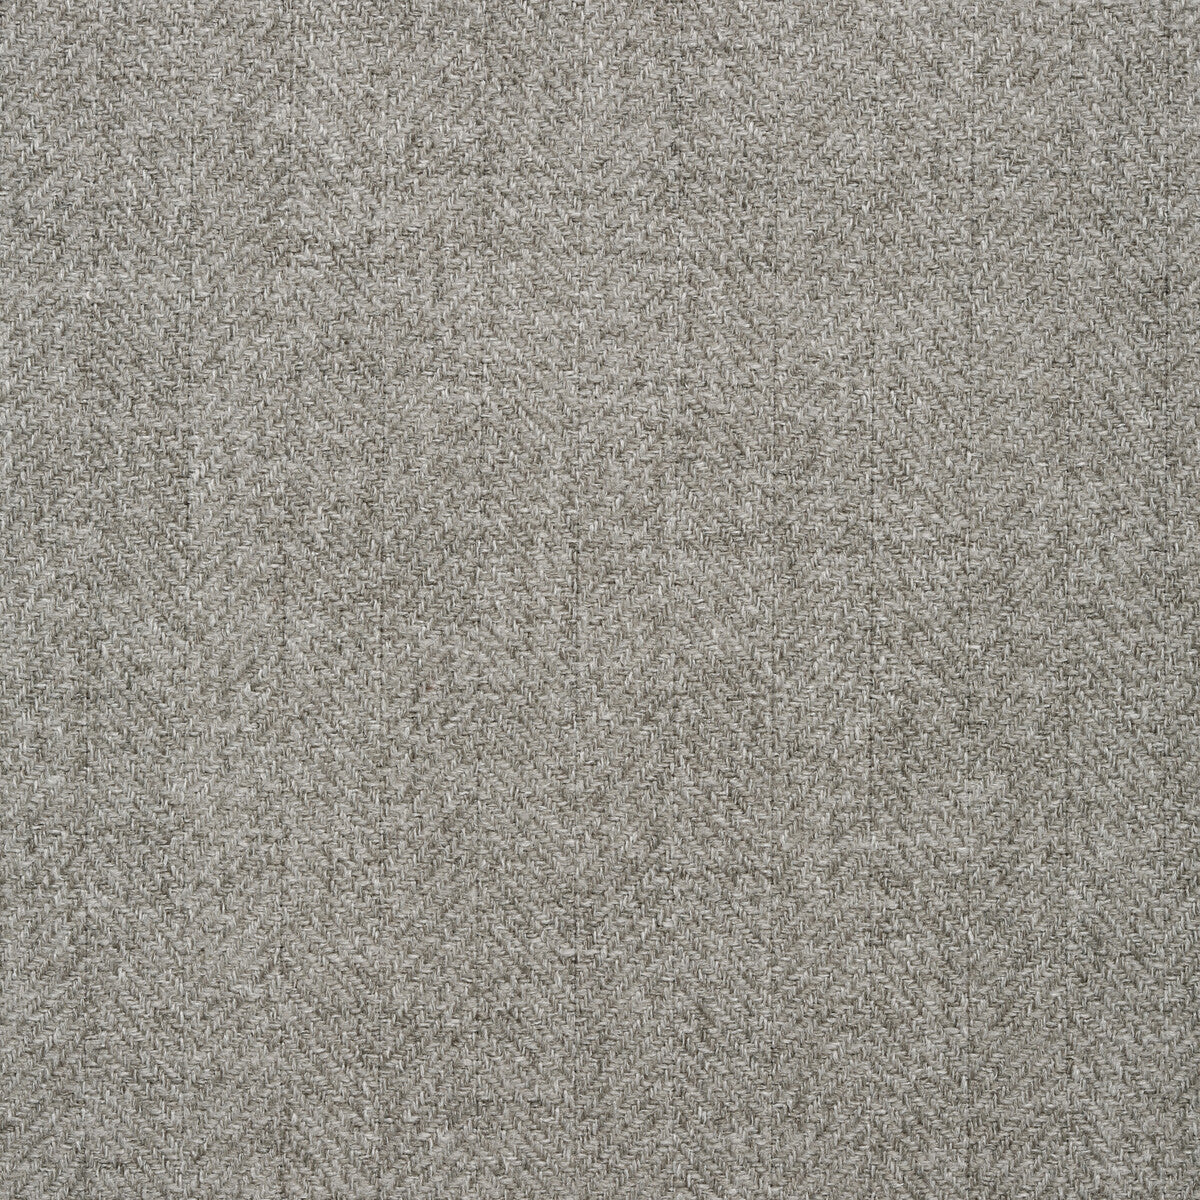 Kravet Contract fabric in 35120-11 color - pattern 35120.11.0 - by Kravet Contract in the Crypton Incase collection